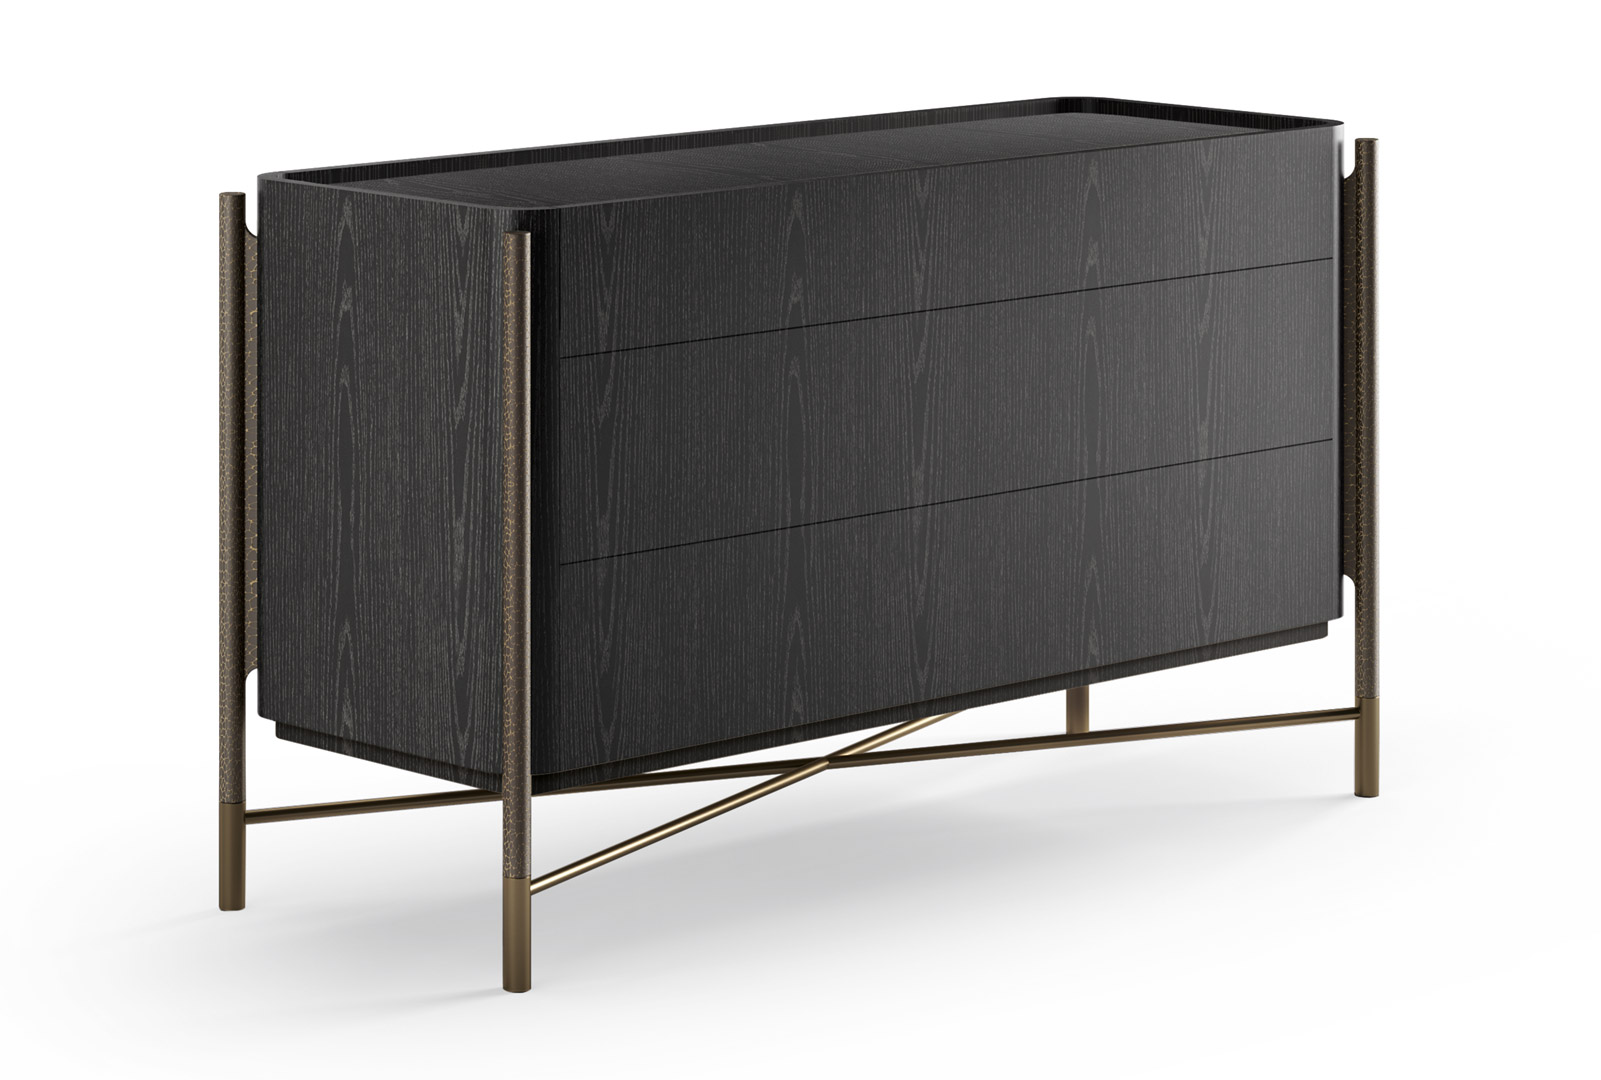 Shanghai chest of drawers - Cantori